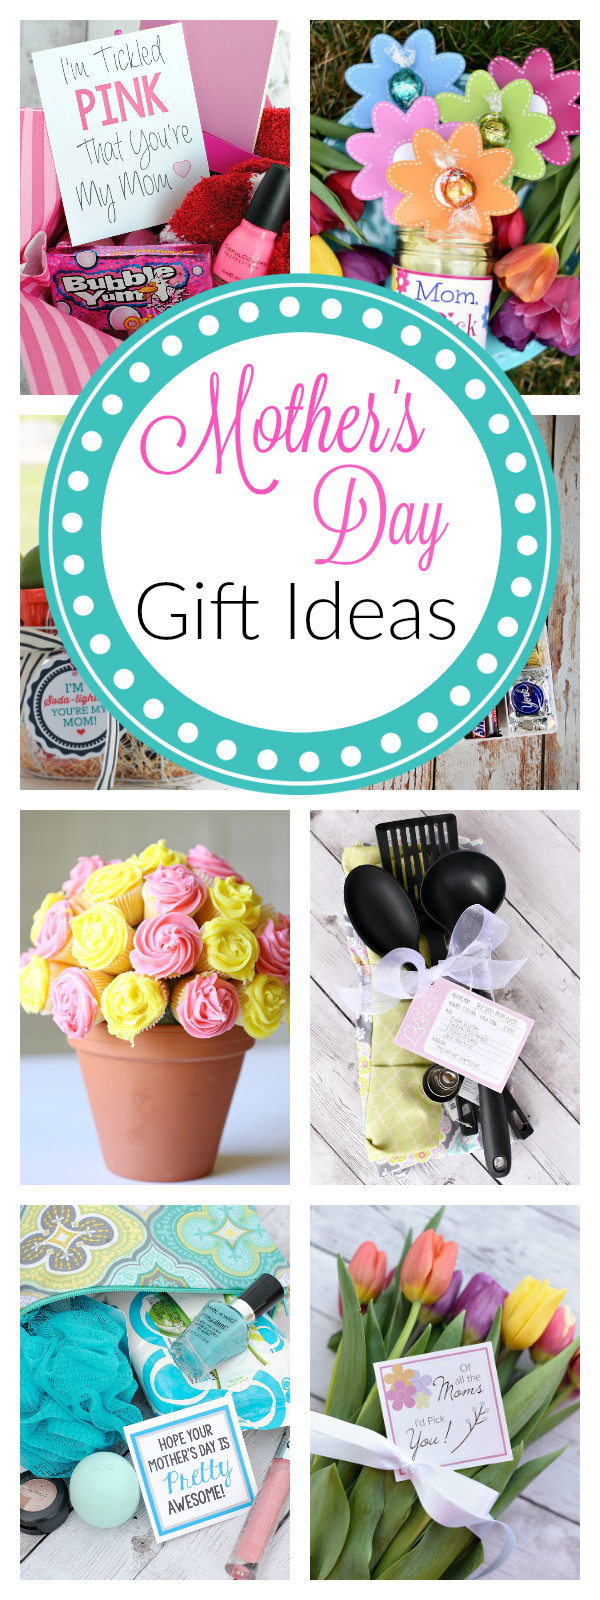 Mother's Day Gift Ideas From Son
 25 Cute Mother s Day Gifts – Fun Squared